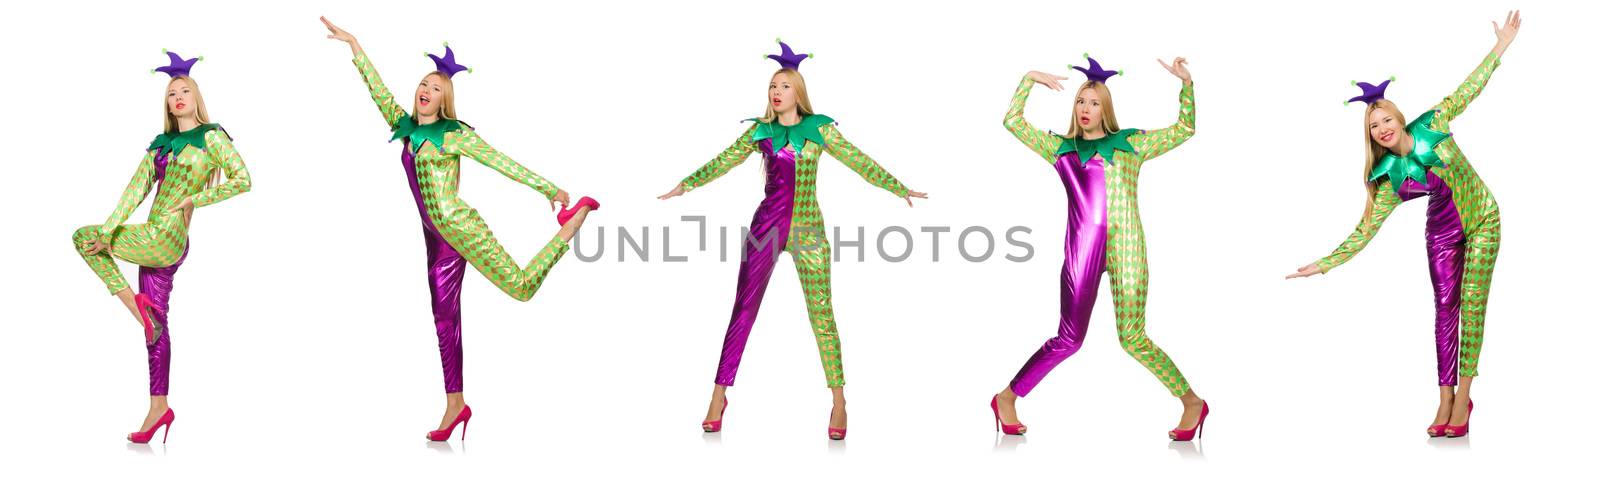 Woman wearing clown costume isolated on white by Elnur